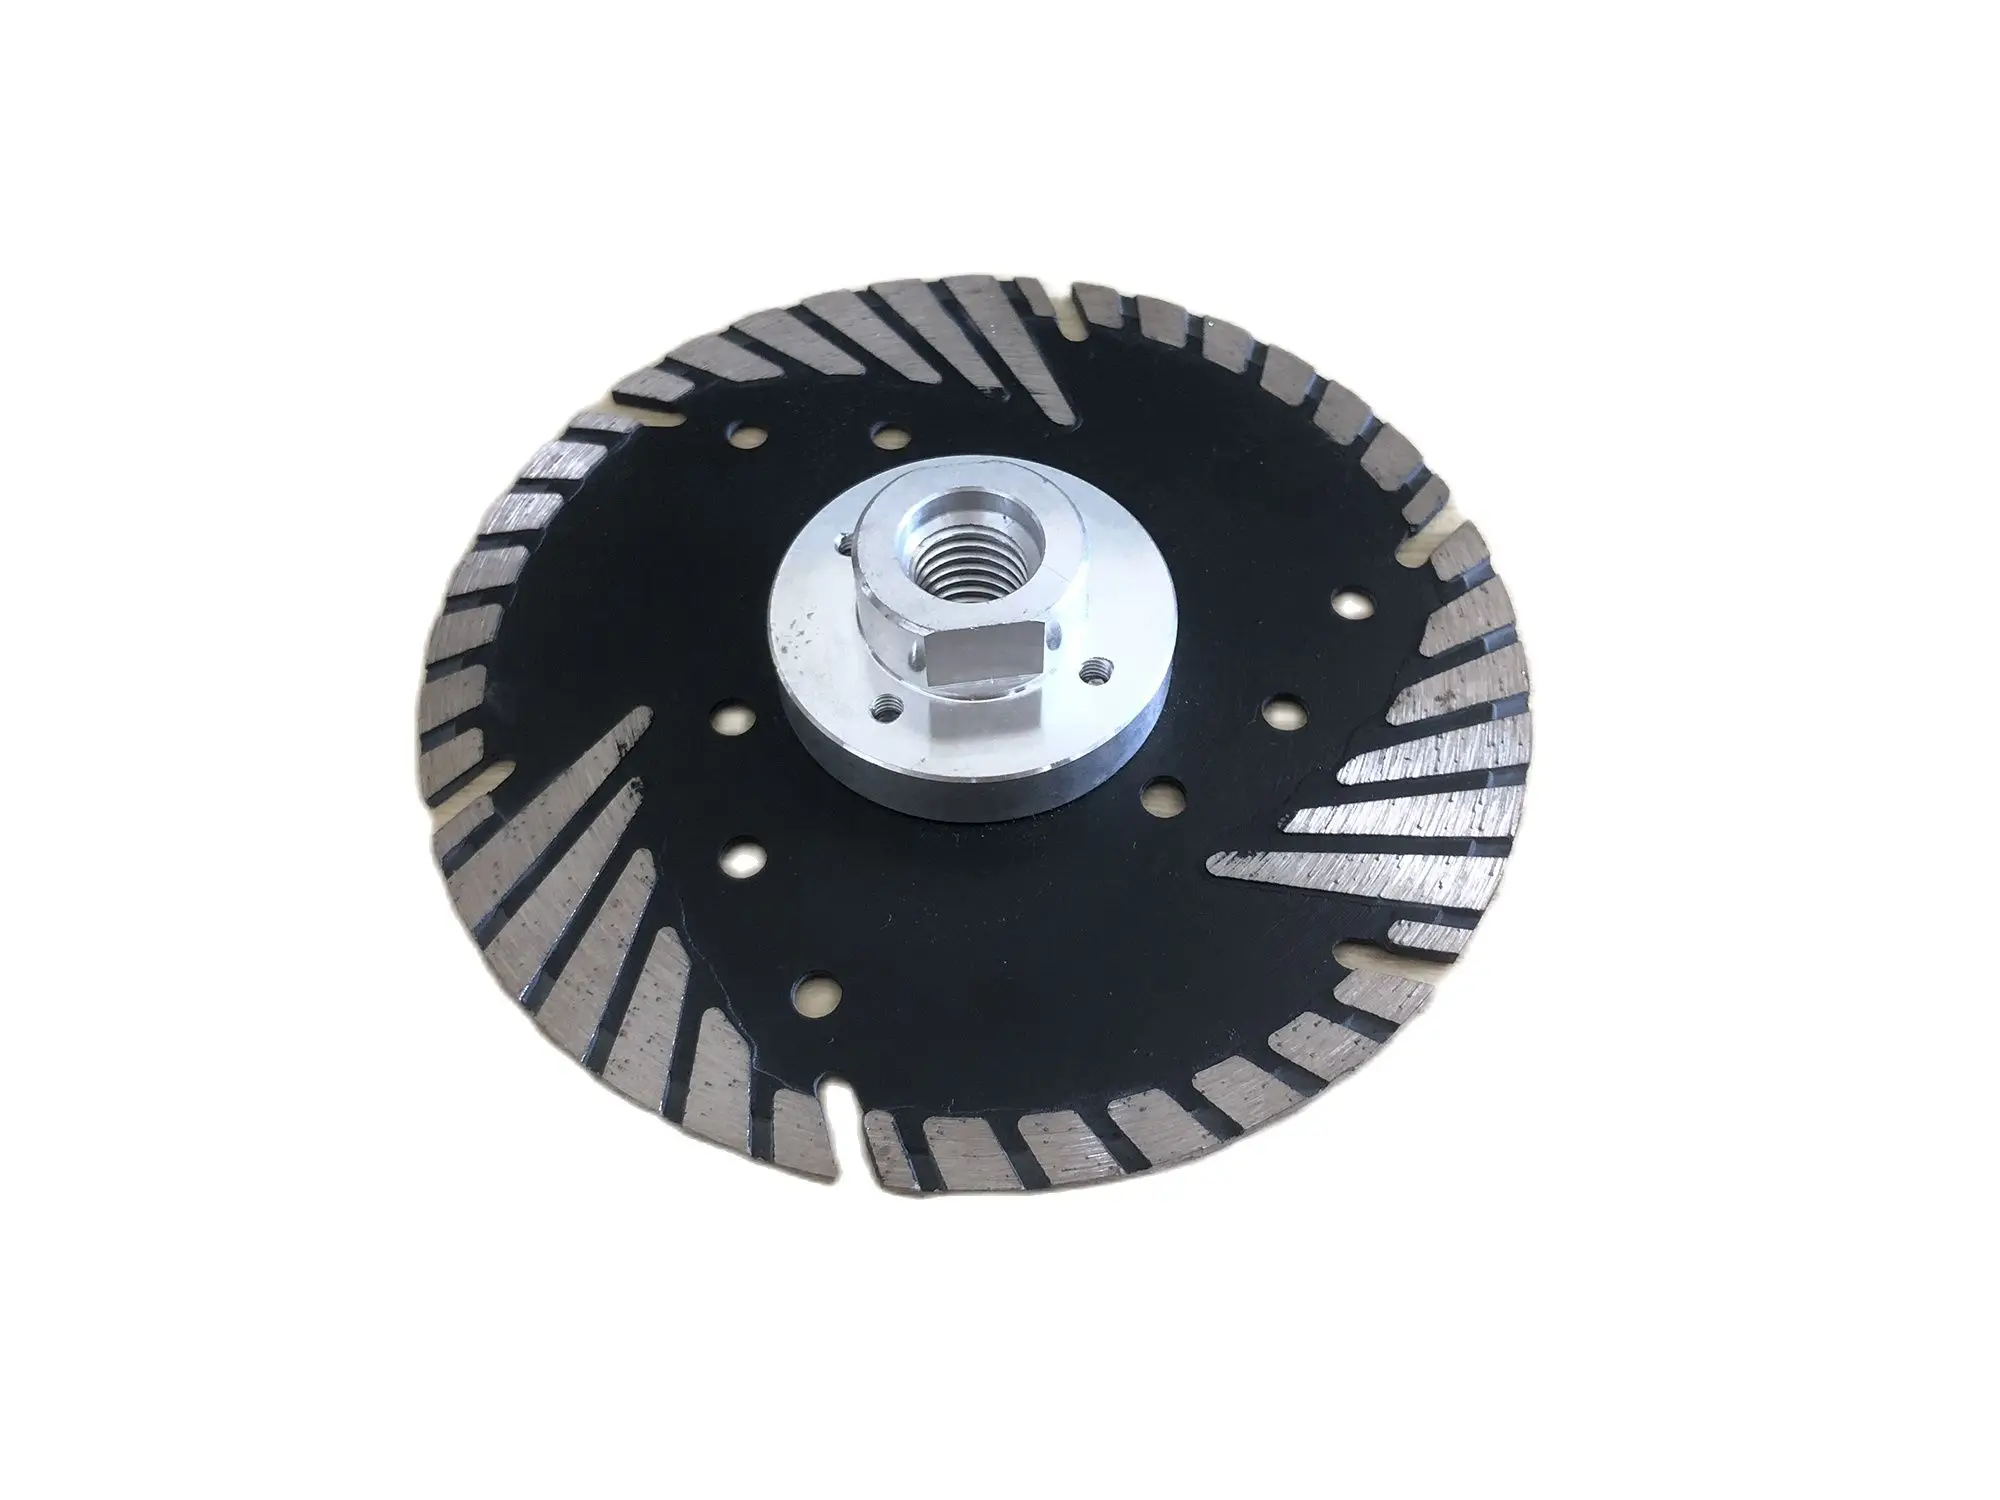 125MM Granite Marble Cutting Blade Ceramic Tile Stone Saw Blade Concrete Wall Cutting Corrugated Blade With Protective Teeth